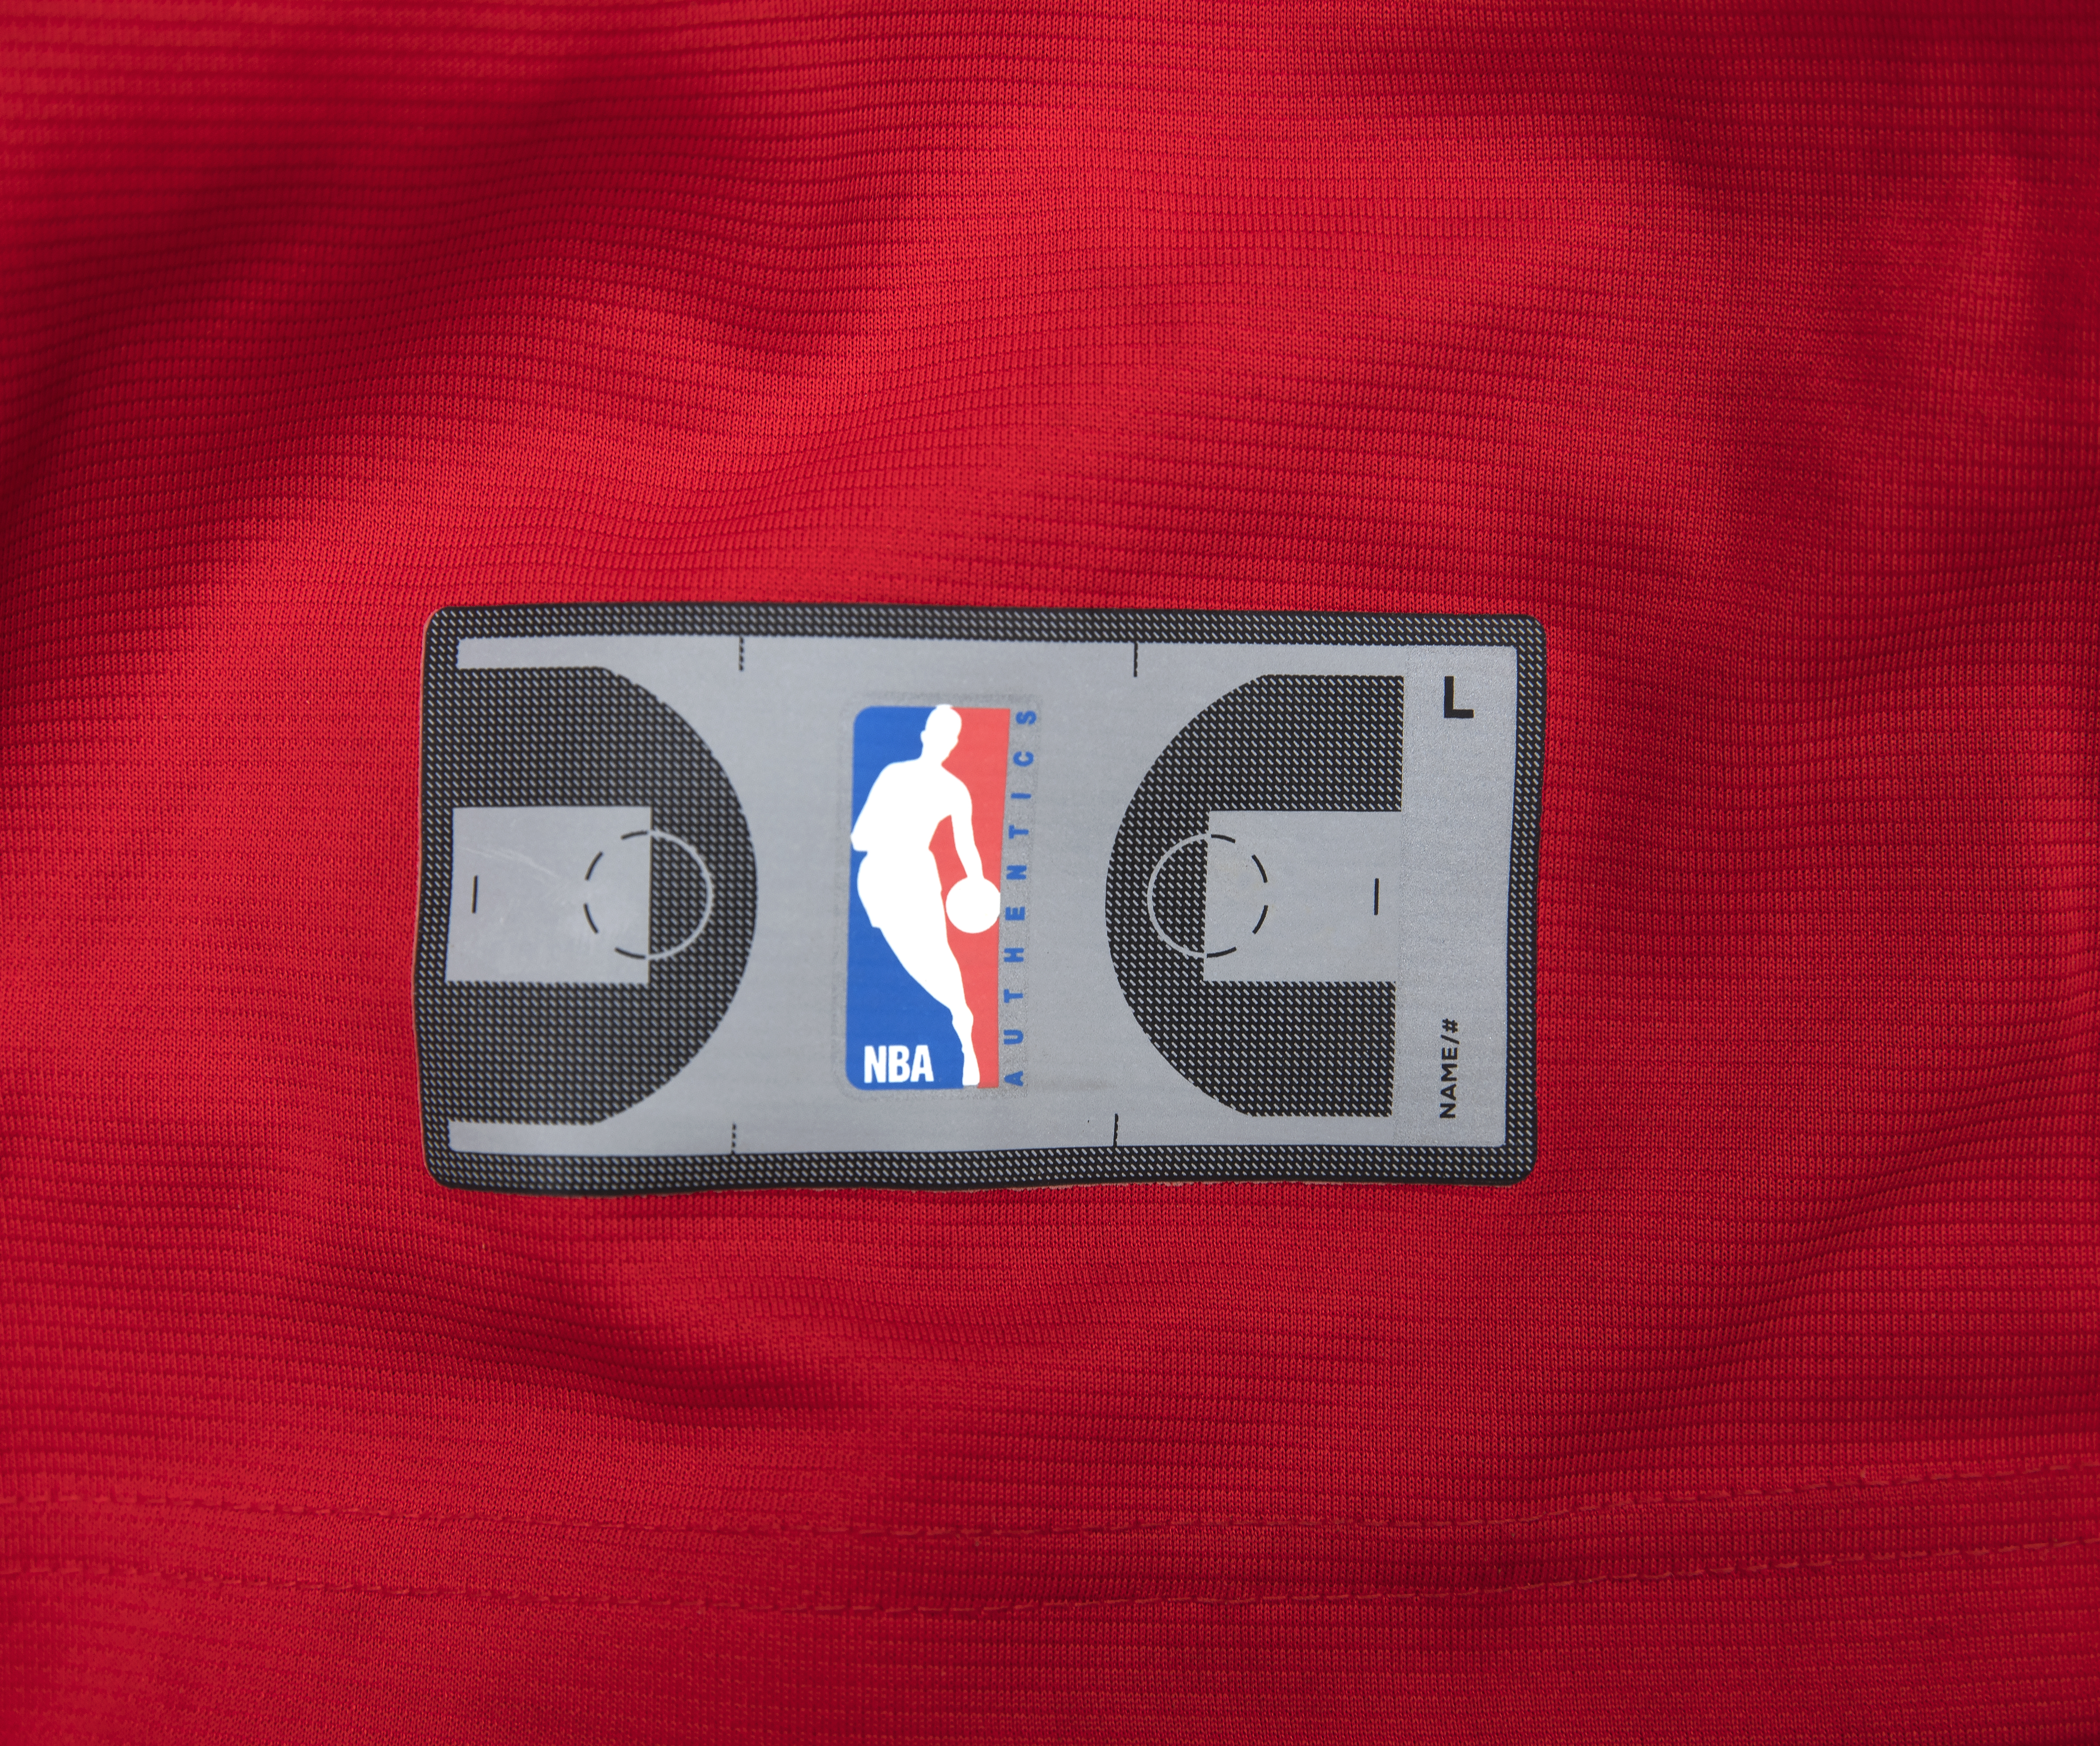 difference between replica and authentic basketball jersey